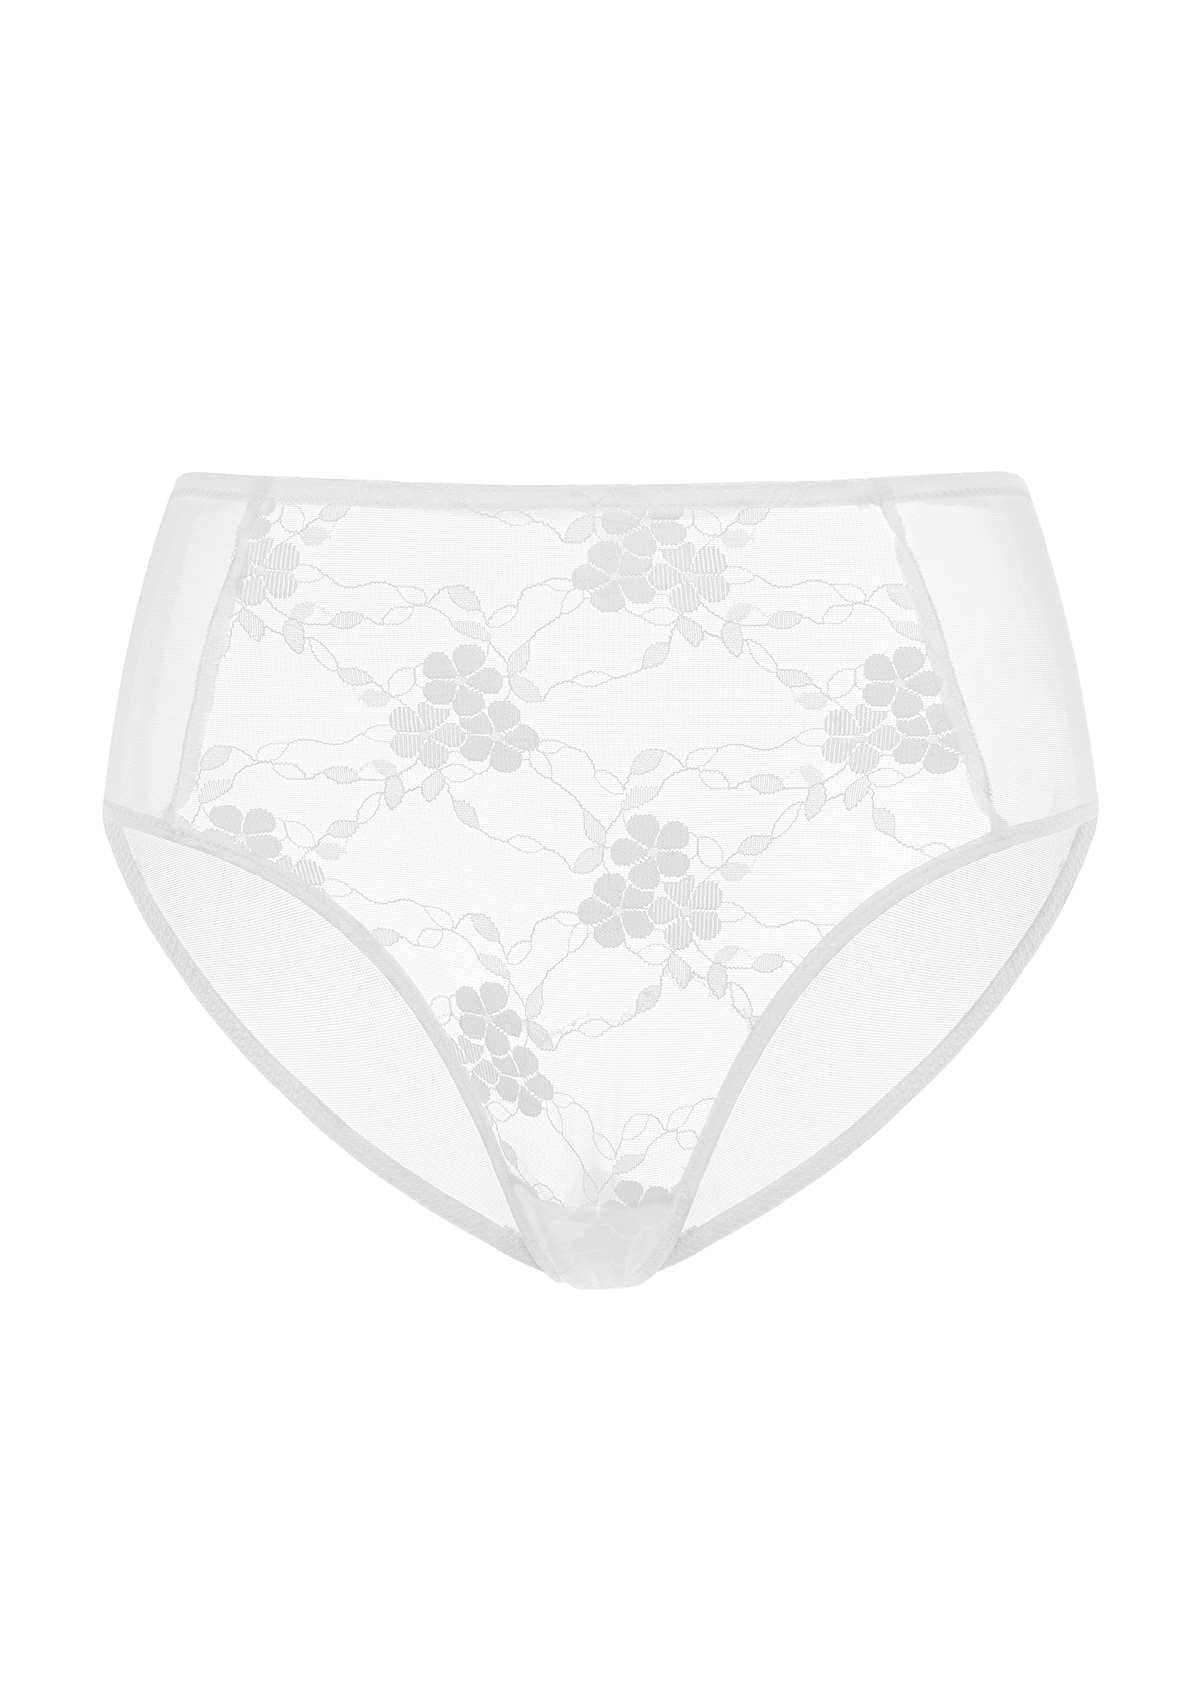 HSIA Spring Romance High-Rise Floral Lacy Panty-Comfort In Style - M / Dusty Peach